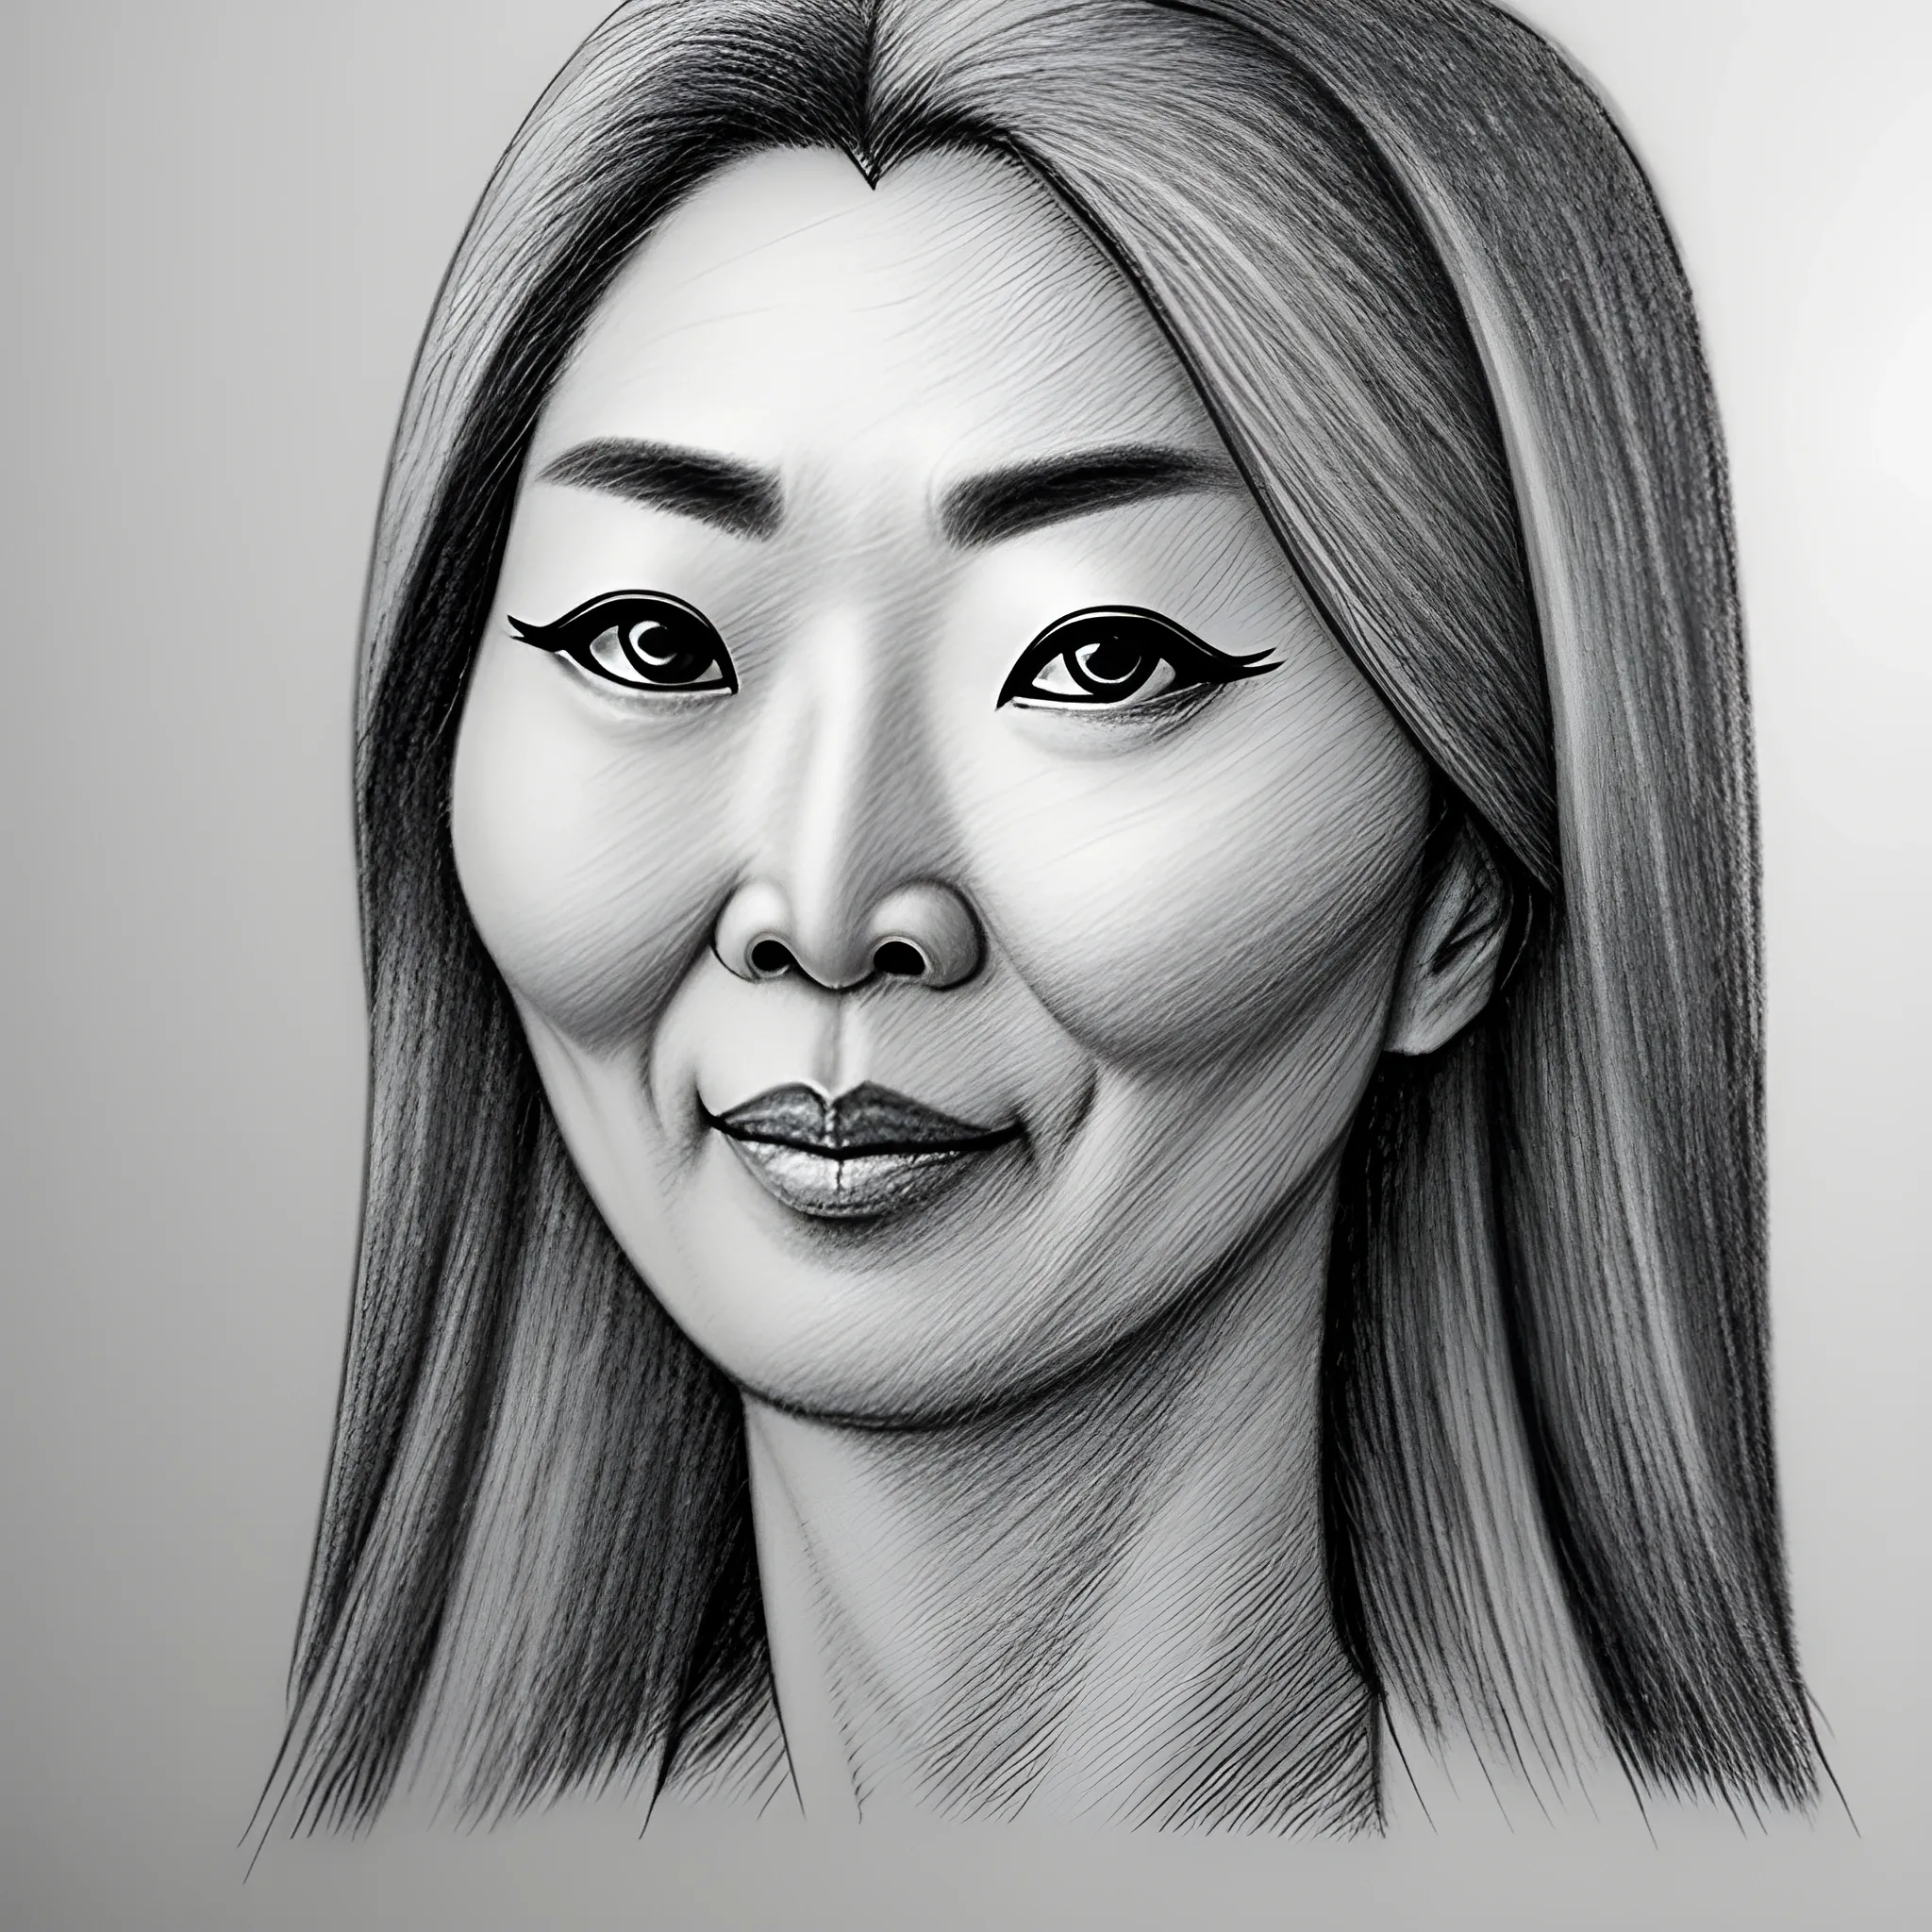 blind oracle, wise, no background, detailed, asian, young woman, eyes covered, Pencil Sketch